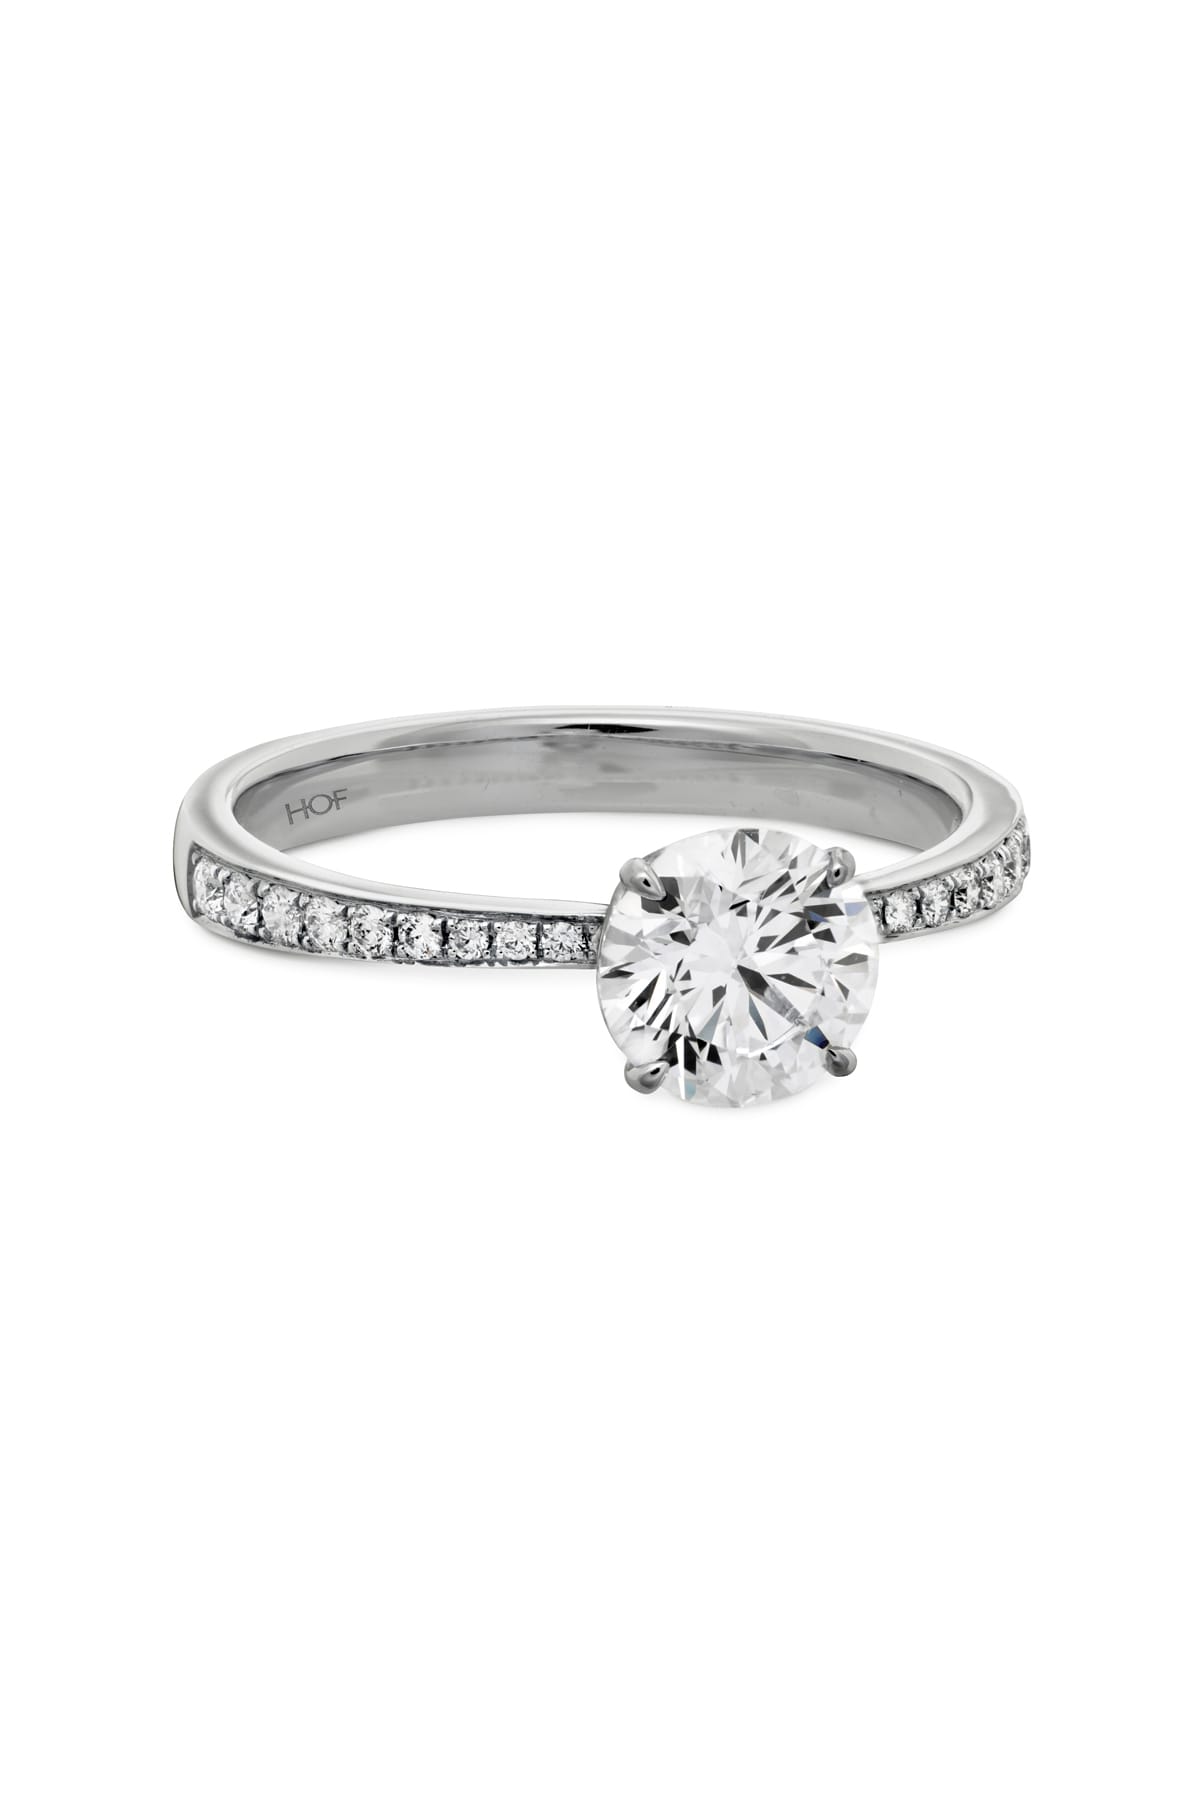 Signature Engagement Ring From Hearts On Fire available at LeGassick Diamonds and Jewellery Gold Coast, Australia.